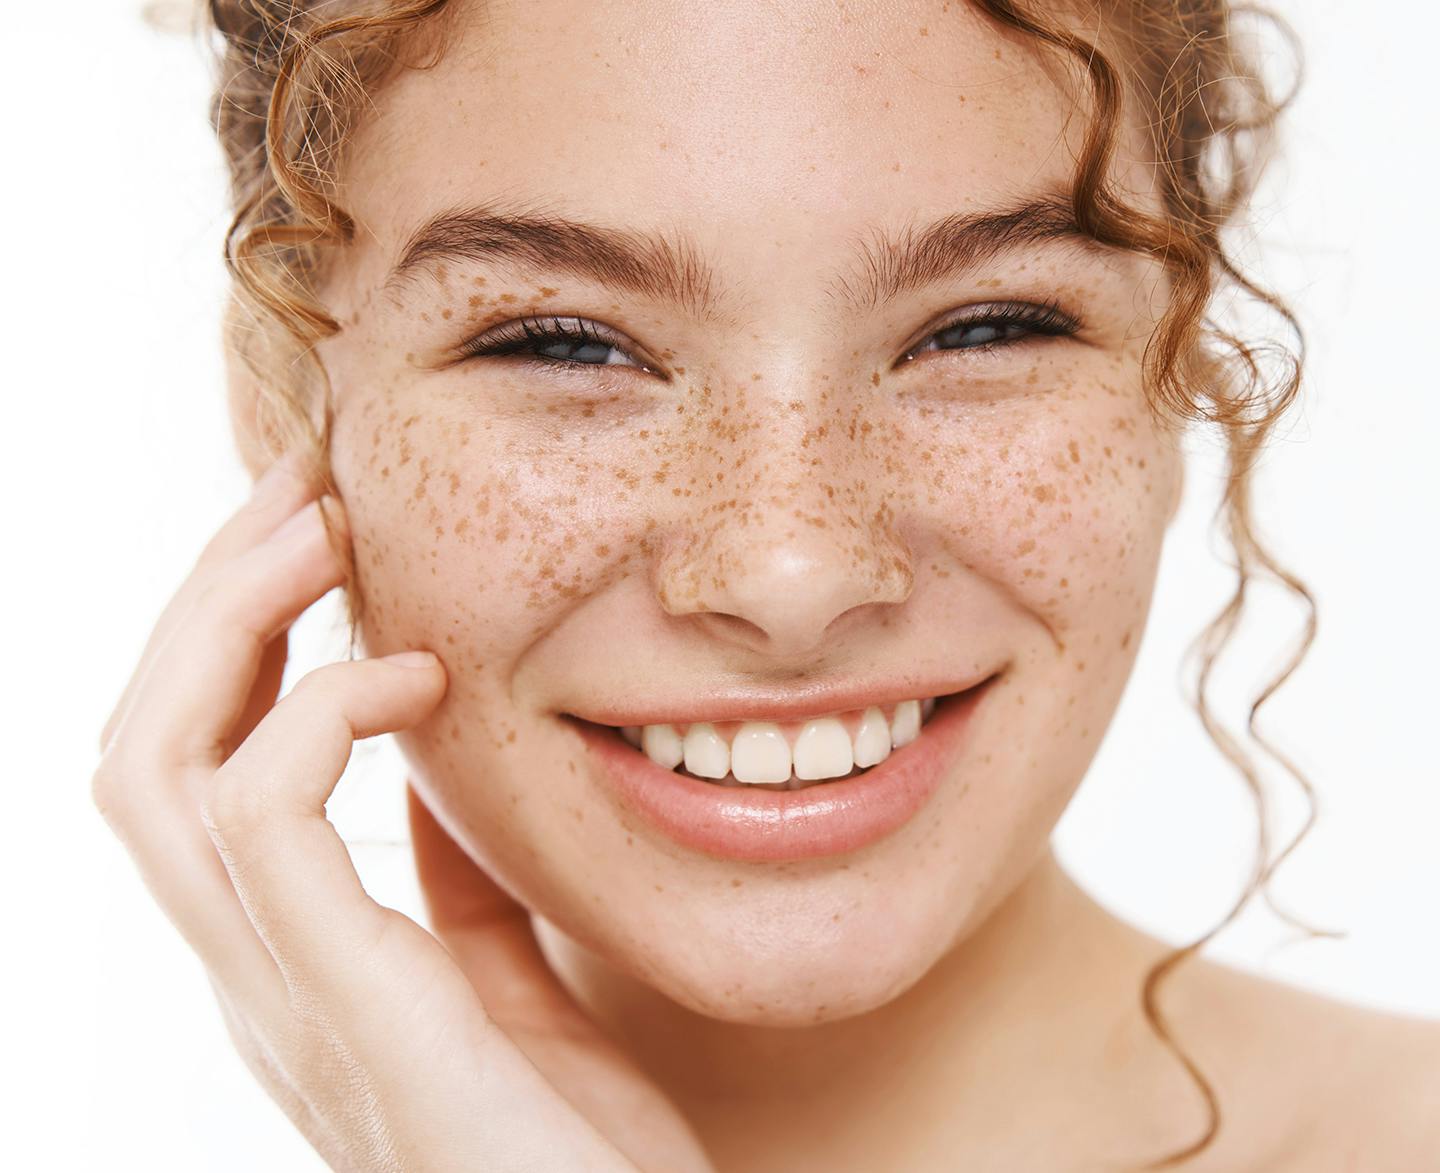 woman with freckles and curly hair smiling